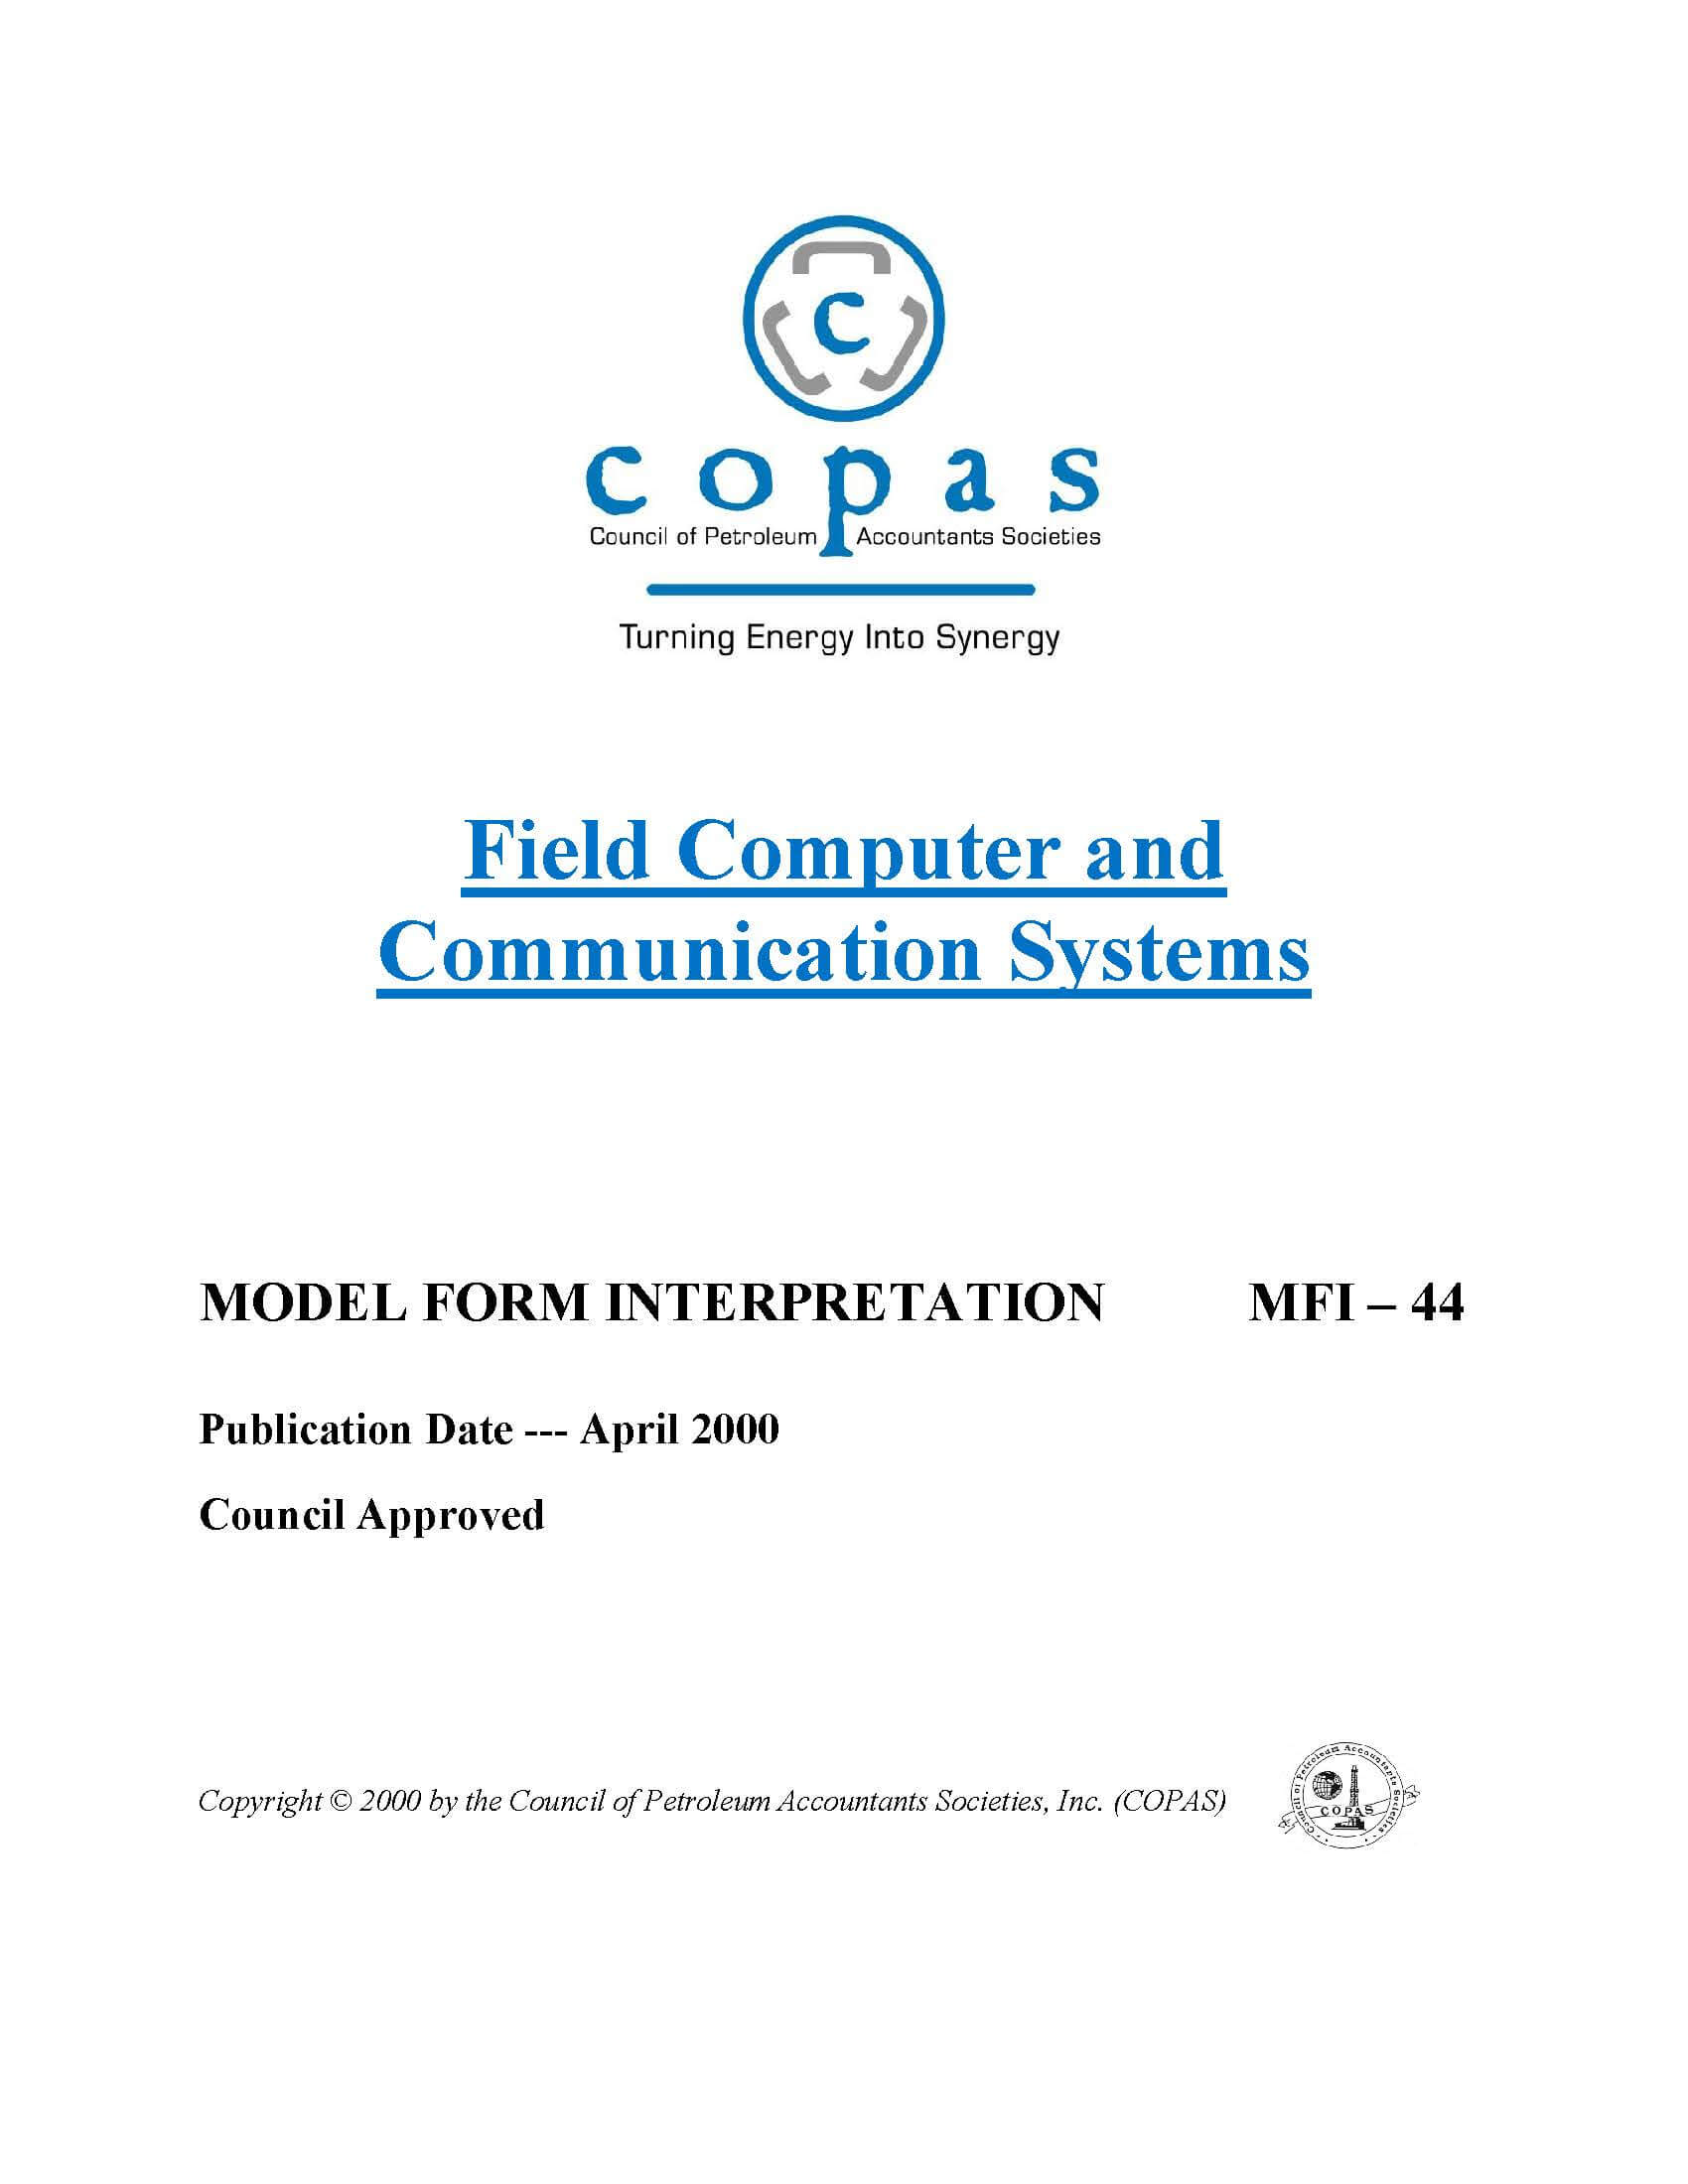 MFI-44 Field Computer and Communication Systems - products MFI 44 Field Computer and Communcation Systems - Council of Petroleum Accountants Societies